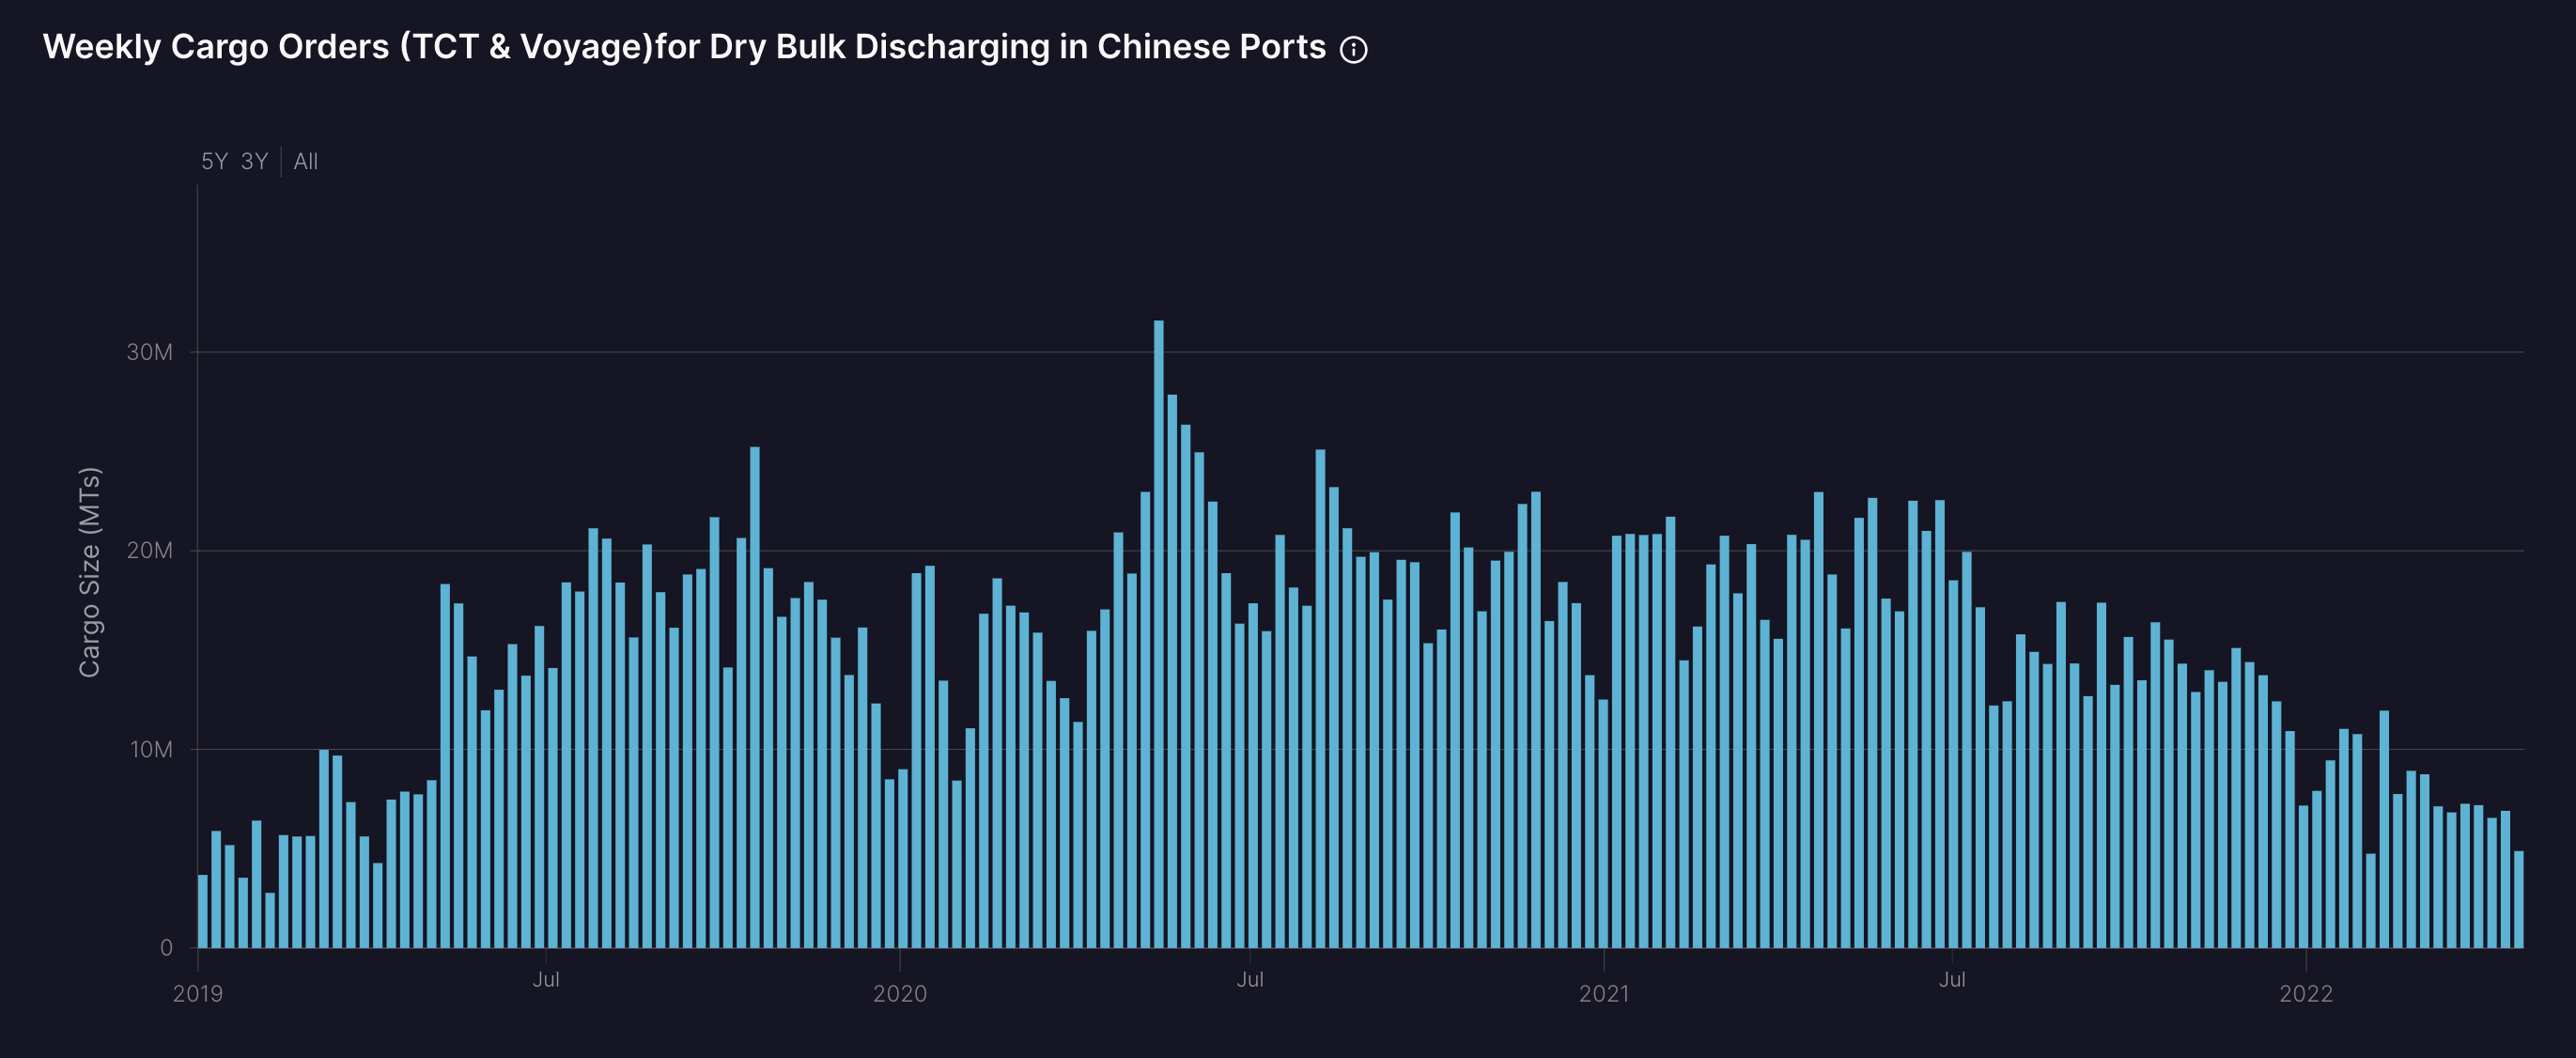 Aggregate dry bulk cargo orders for China